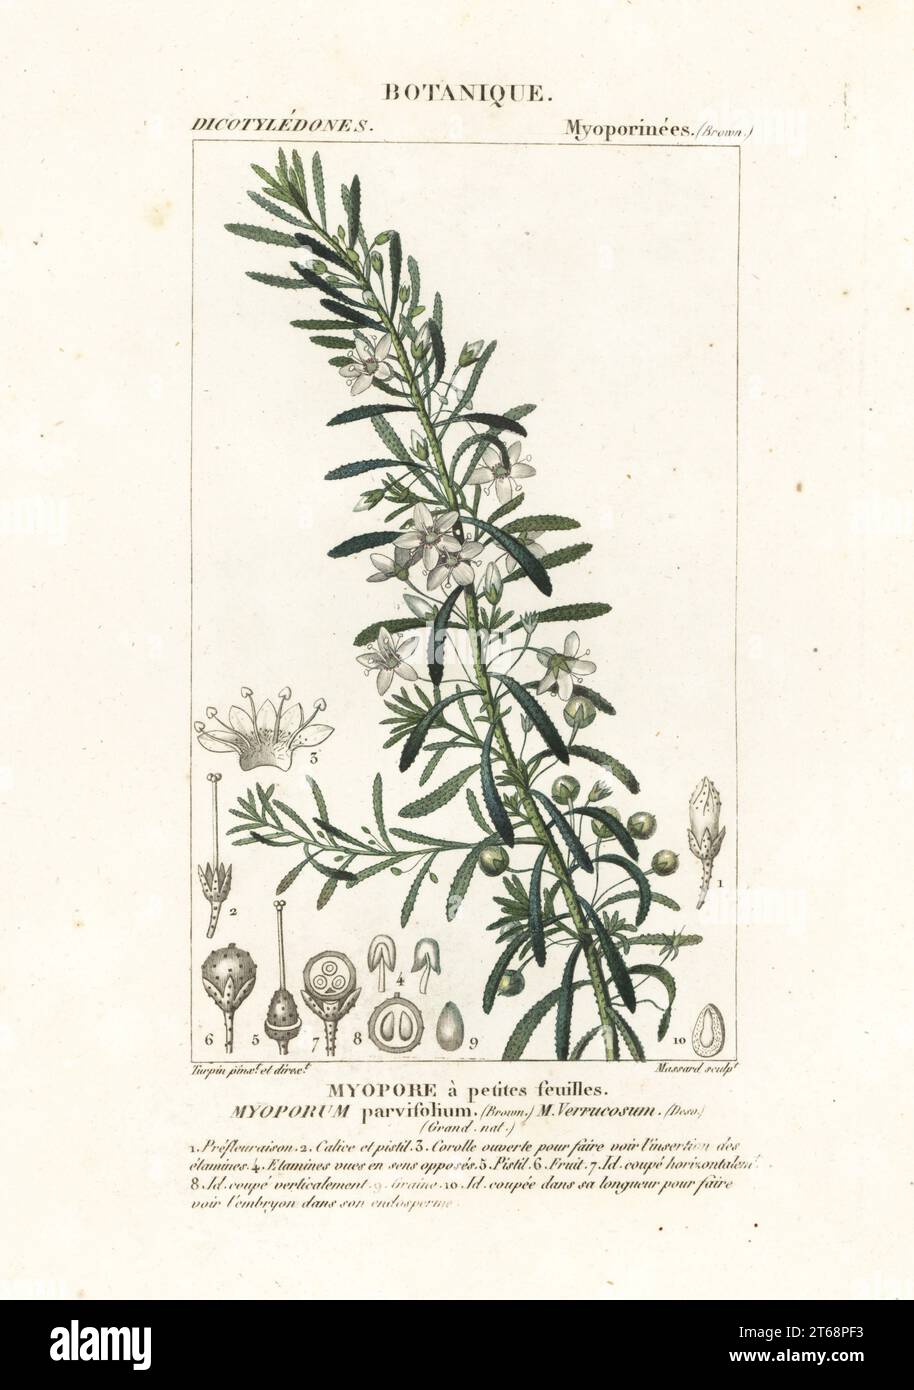 Creeping boobialla, Myoporum parvifolium, Myoporum verrucosum, Myopore a petites feuilles. Handcoloured copperplate stipple engraving from Antoine Laurent de Jussieu's Dizionario delle Scienze Naturali, Dictionary of Natural Science, Florence, Italy, 1837. Illustration engraved by Massard, drawn and directed by Pierre Jean-Francois Turpin, and published by Batelli e Figli. Turpin (1775-1840) is considered one of the greatest French botanical illustrators of the 19th century. Stock Photo